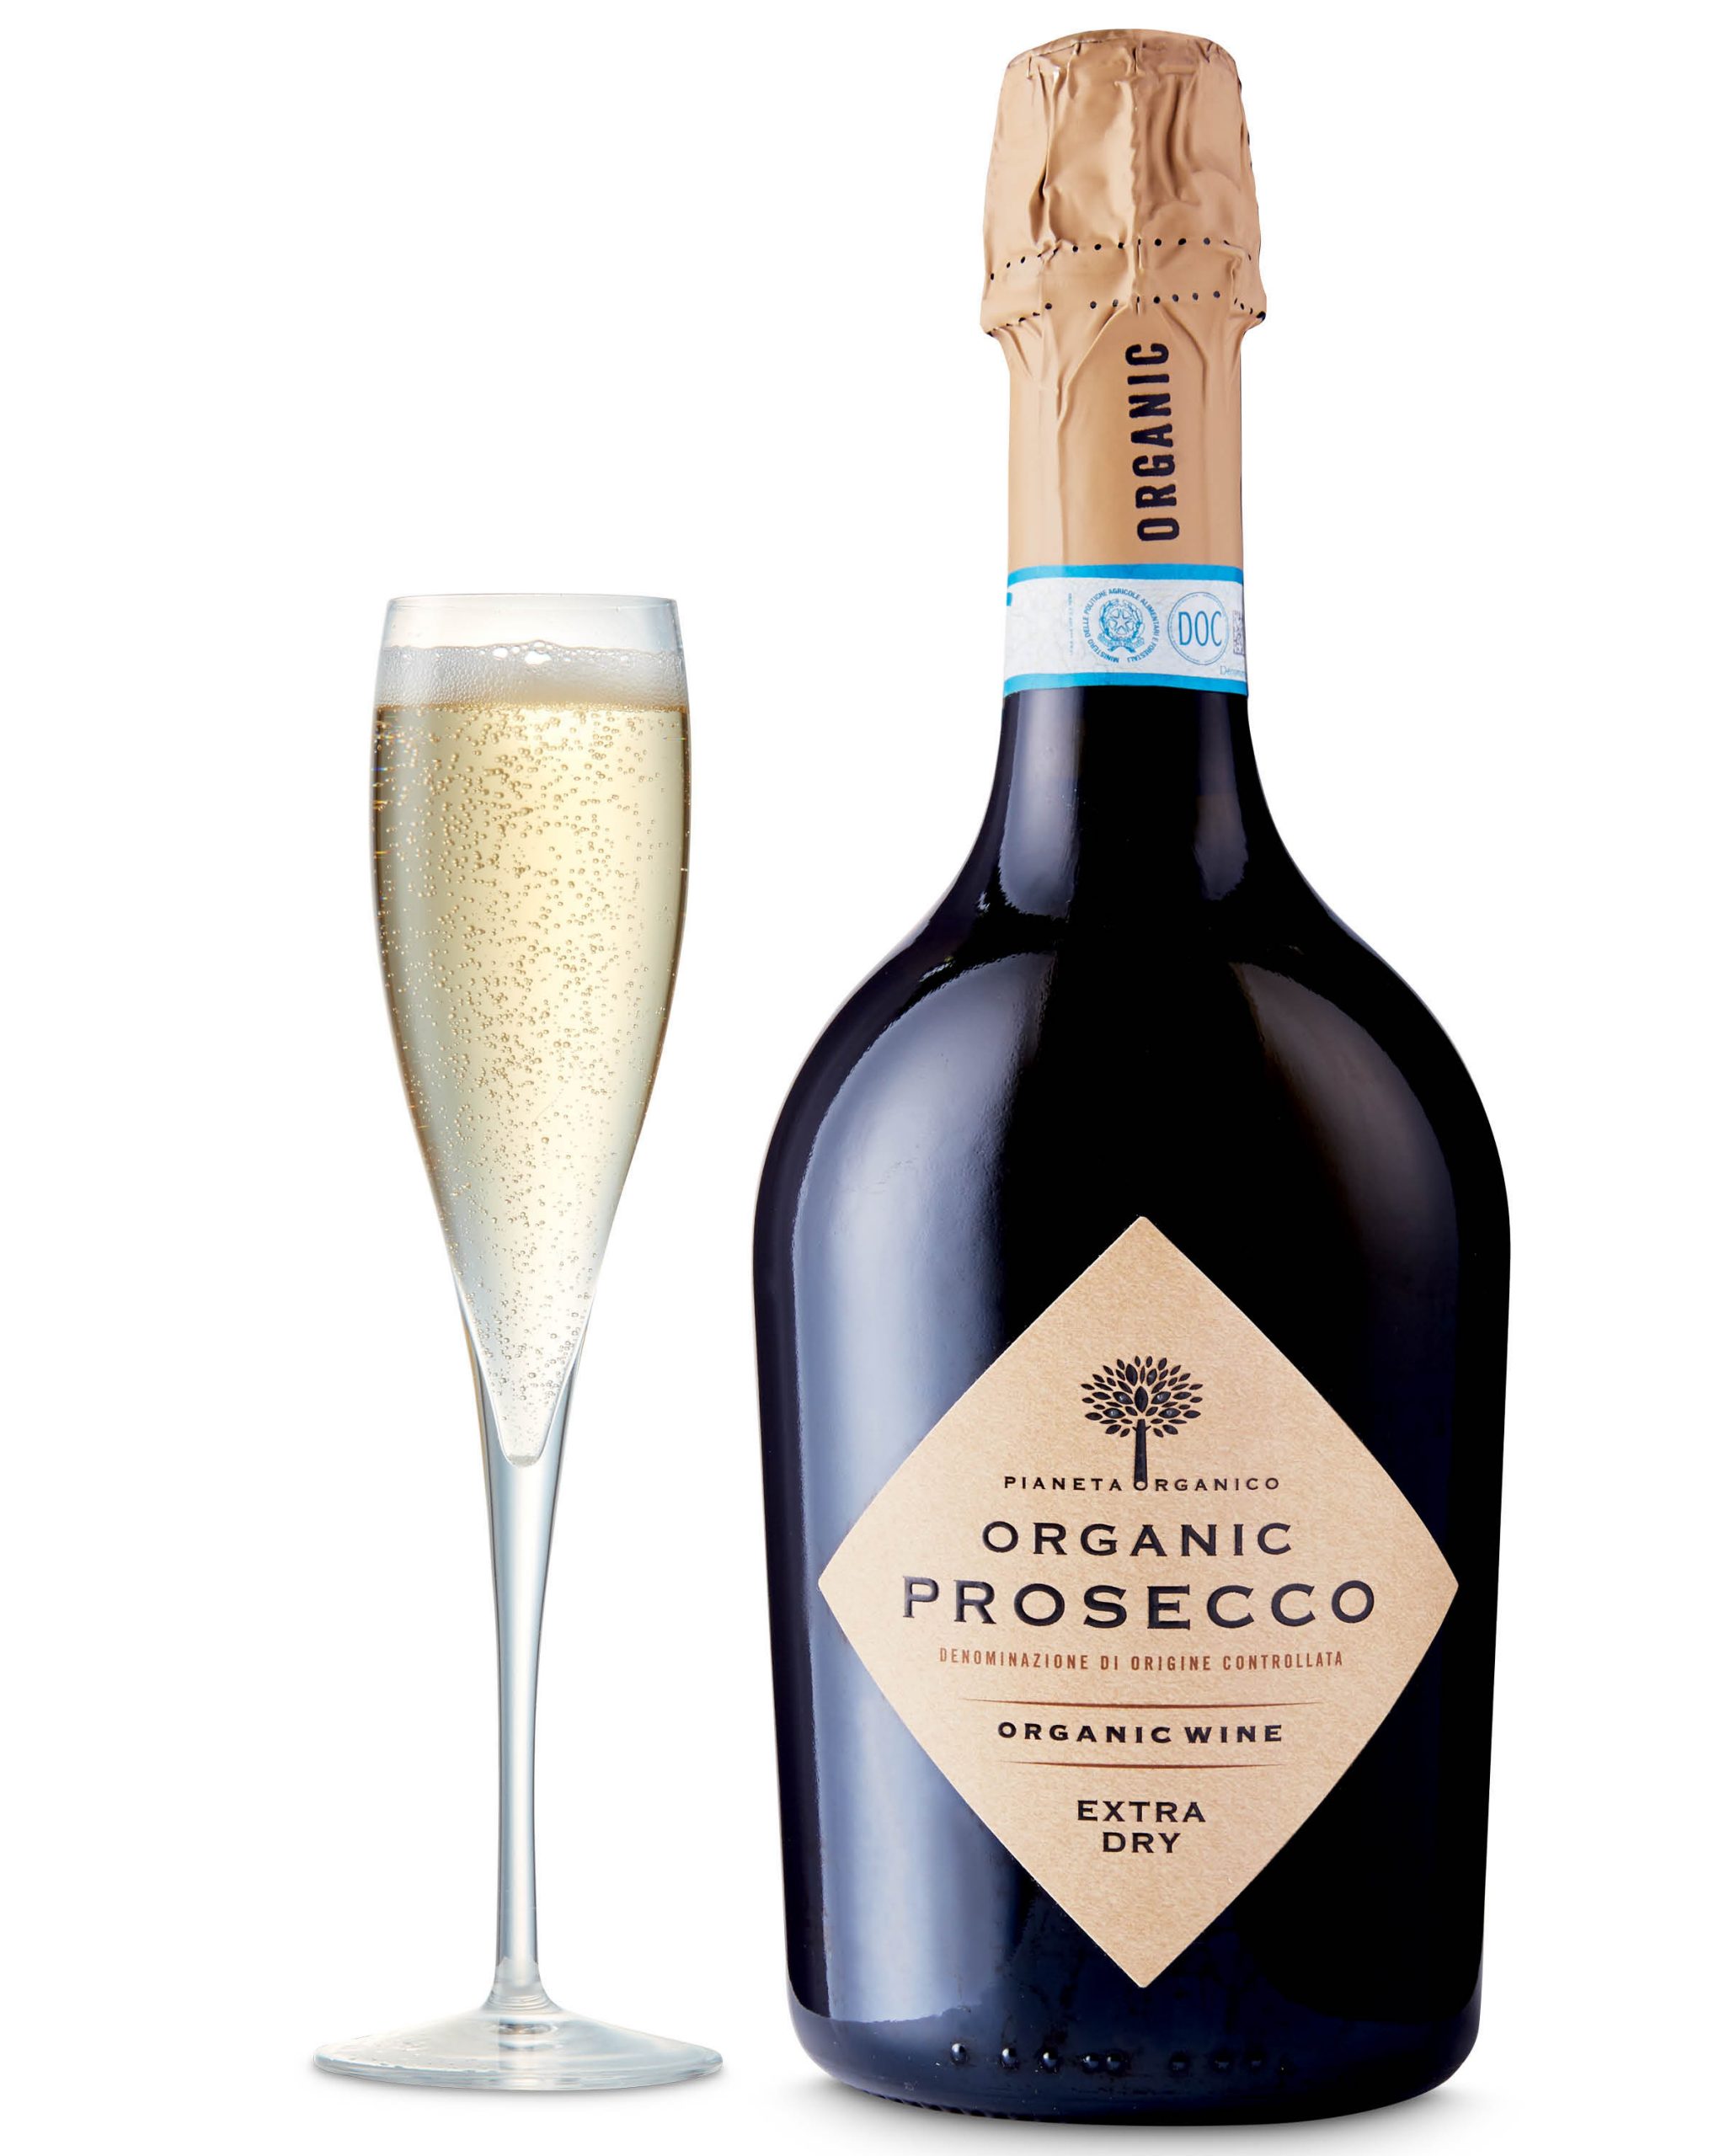 Prosecco- The most popular sparkling wine from Italy 25